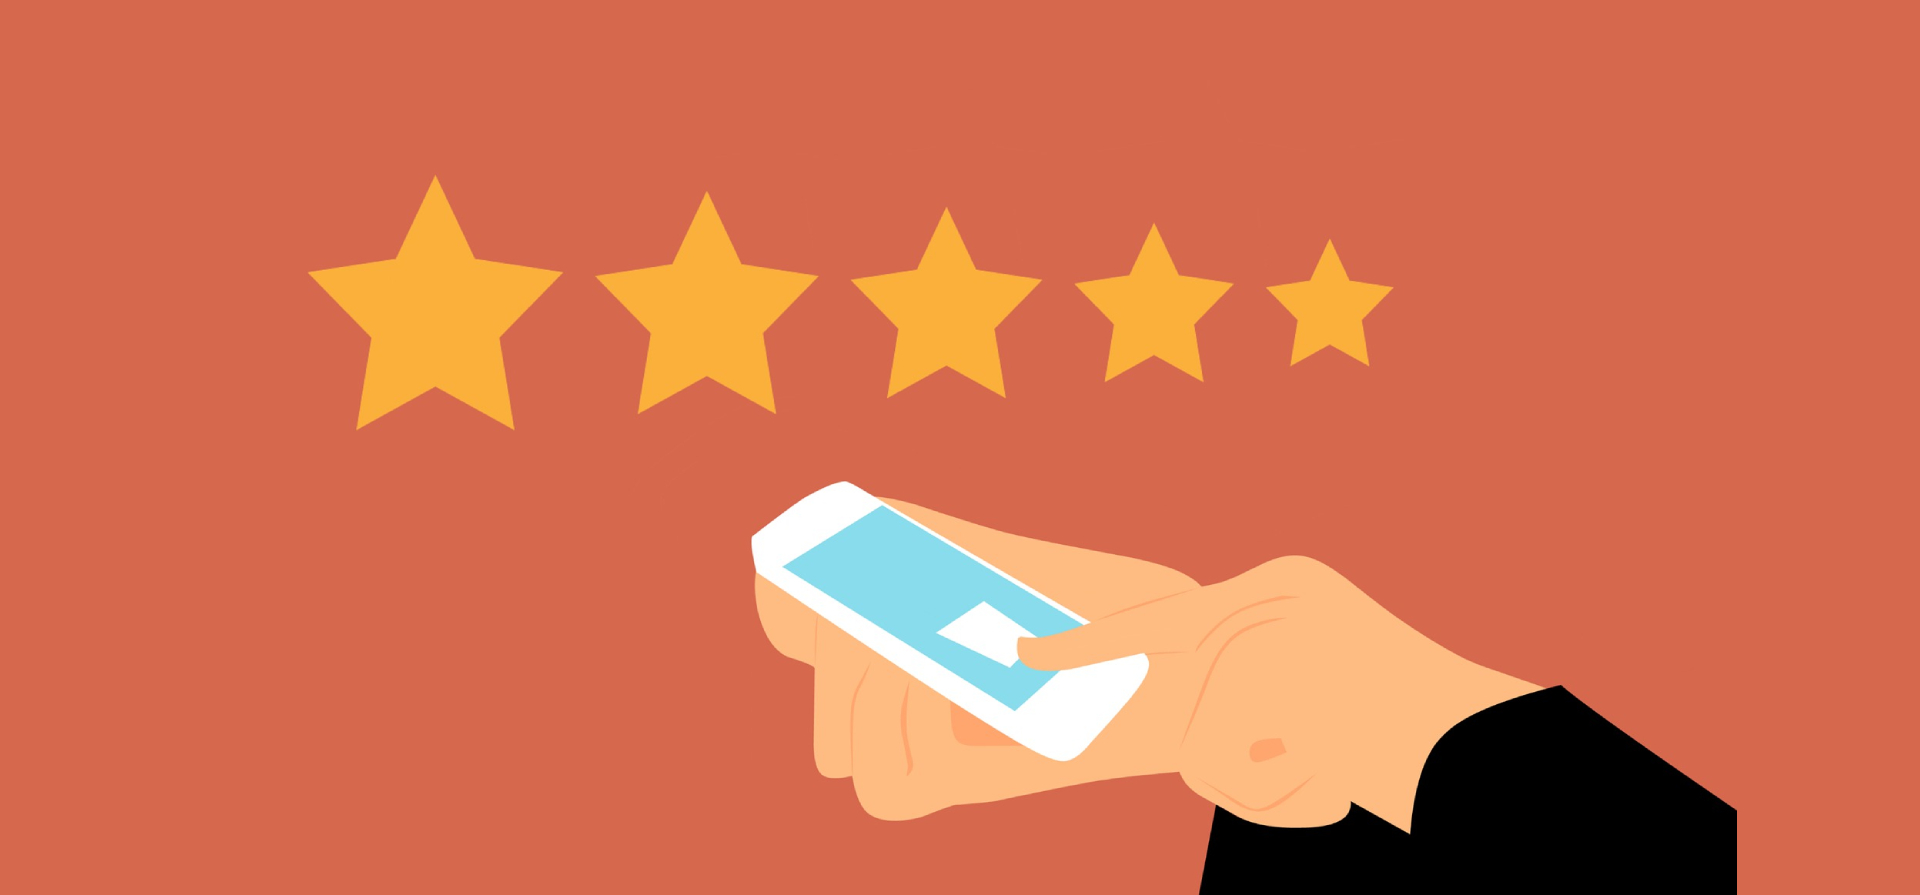 How to Attract More Positive Reviews on Shopee